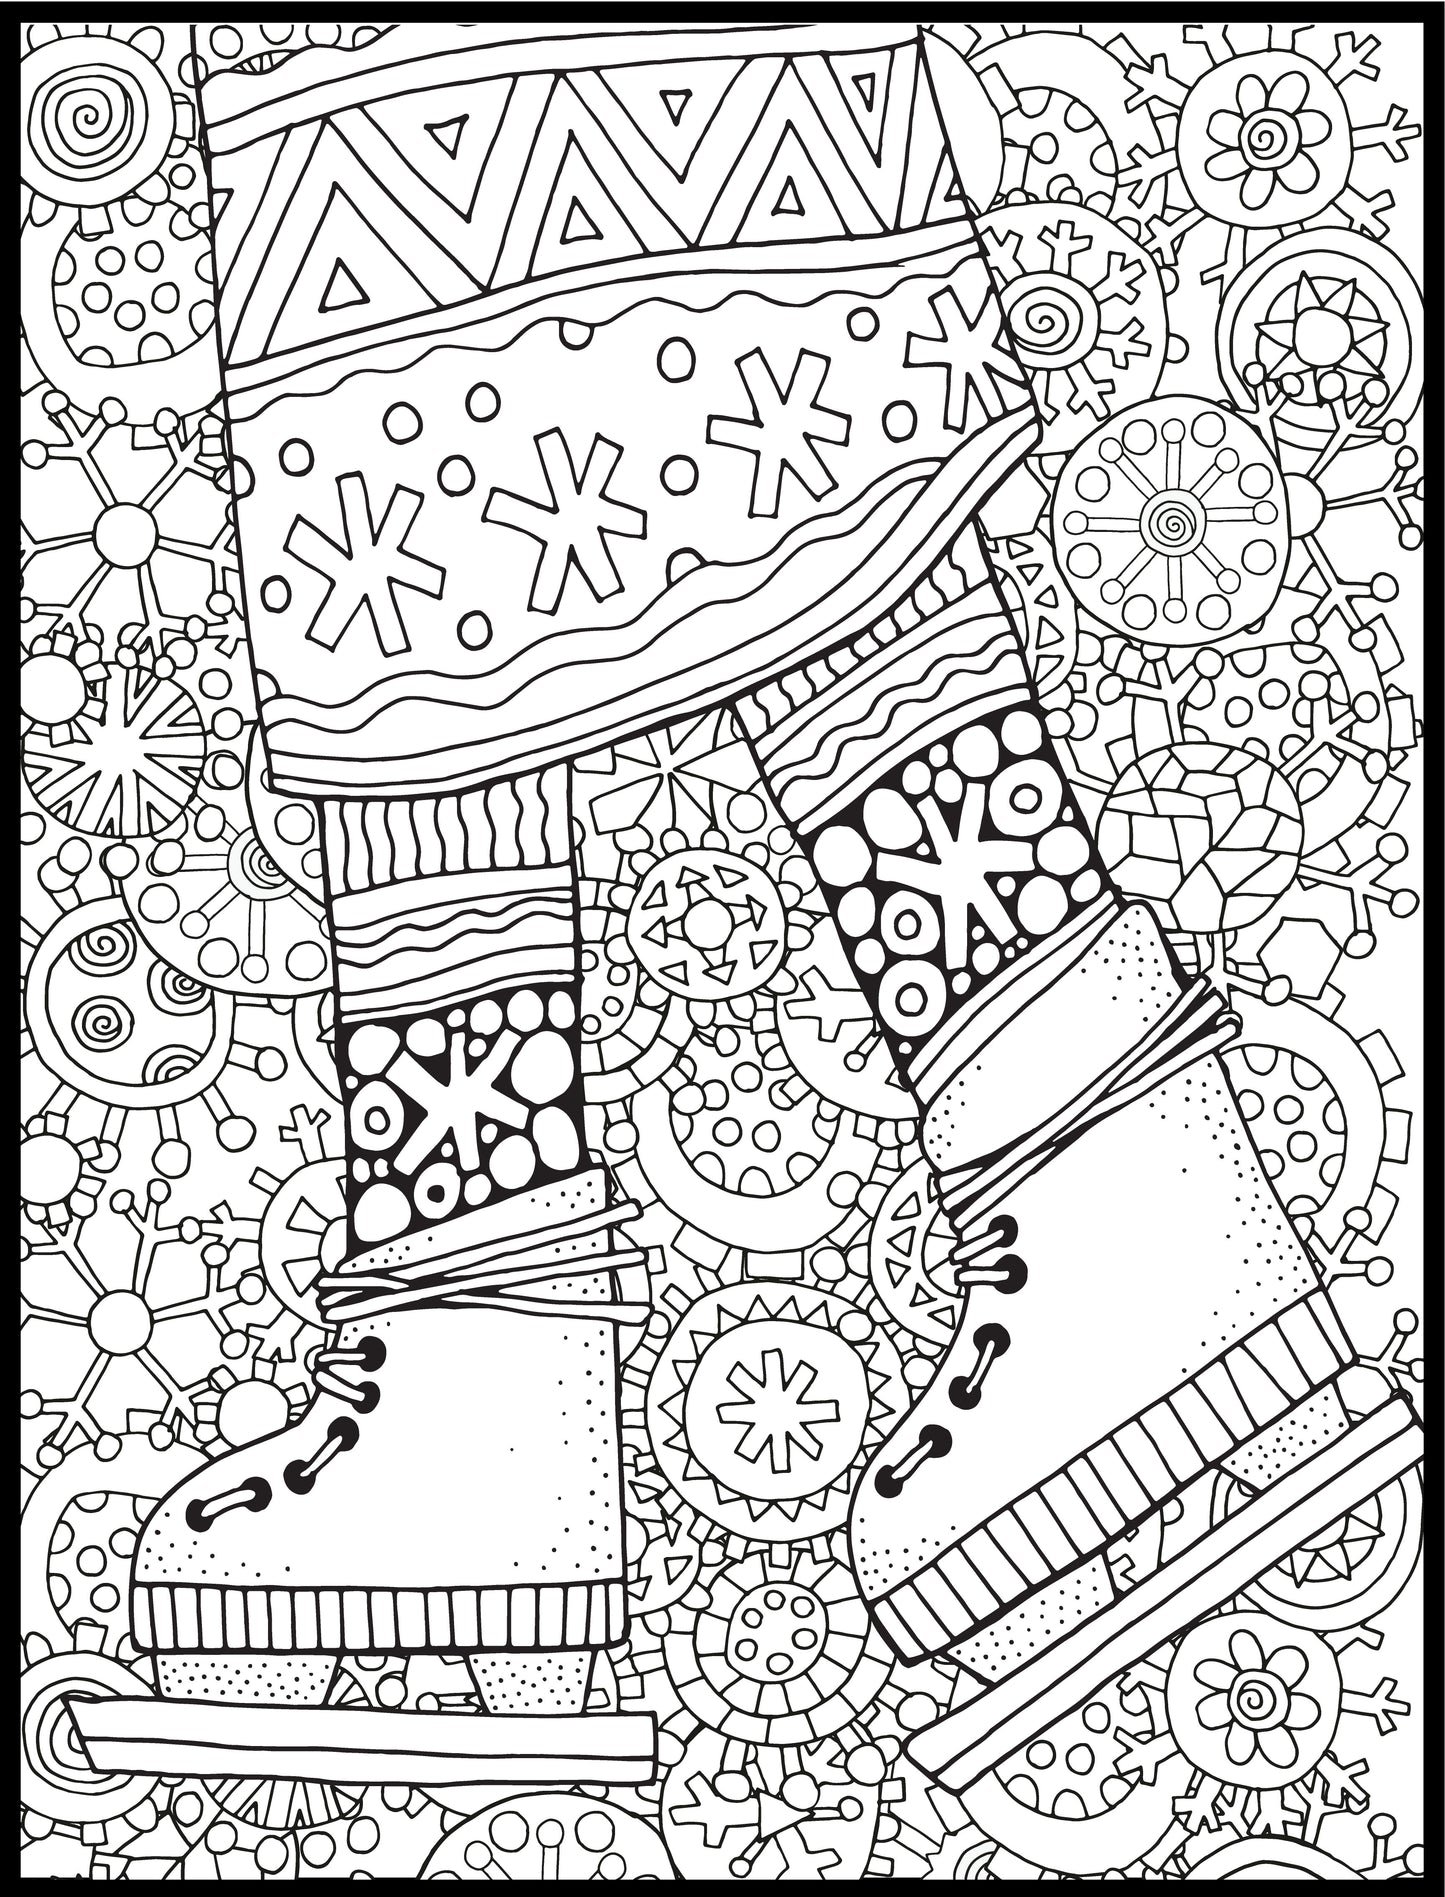 Skater Personalized Giant Coloring Poster 46" X 60"